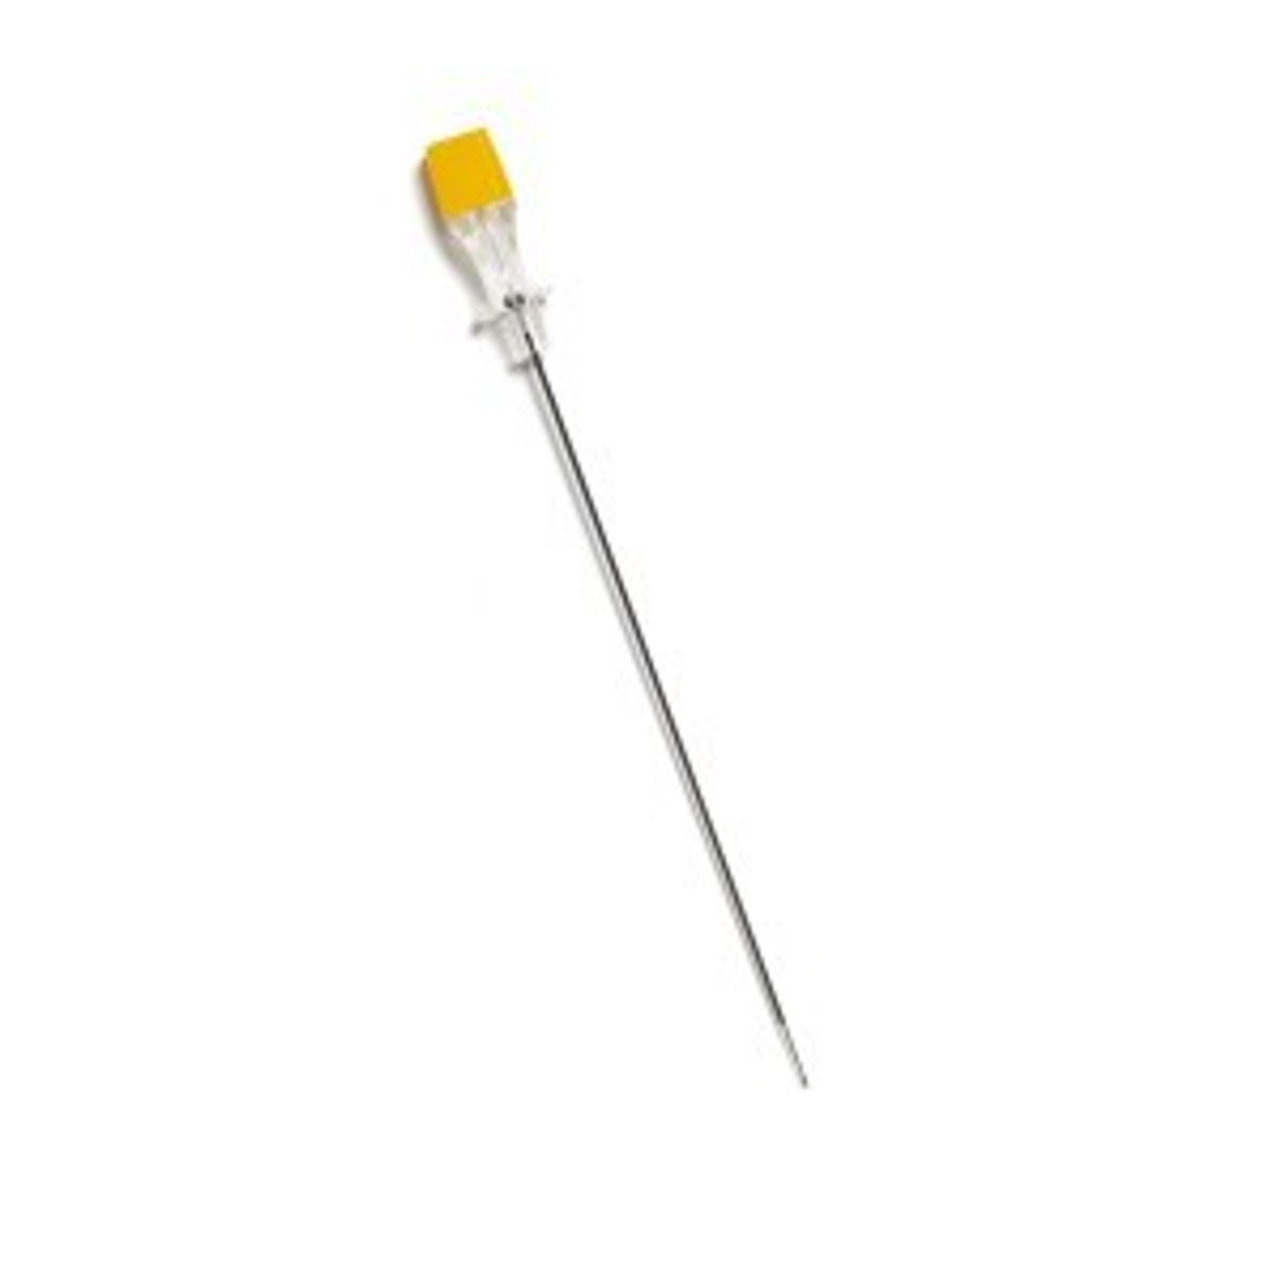 Avanos Cannula, Radiopaque Marker, 20G, 145mm Length, 10mm Active Tip, Curved Sharp, Sterile, Individually Packaged, 10/cs